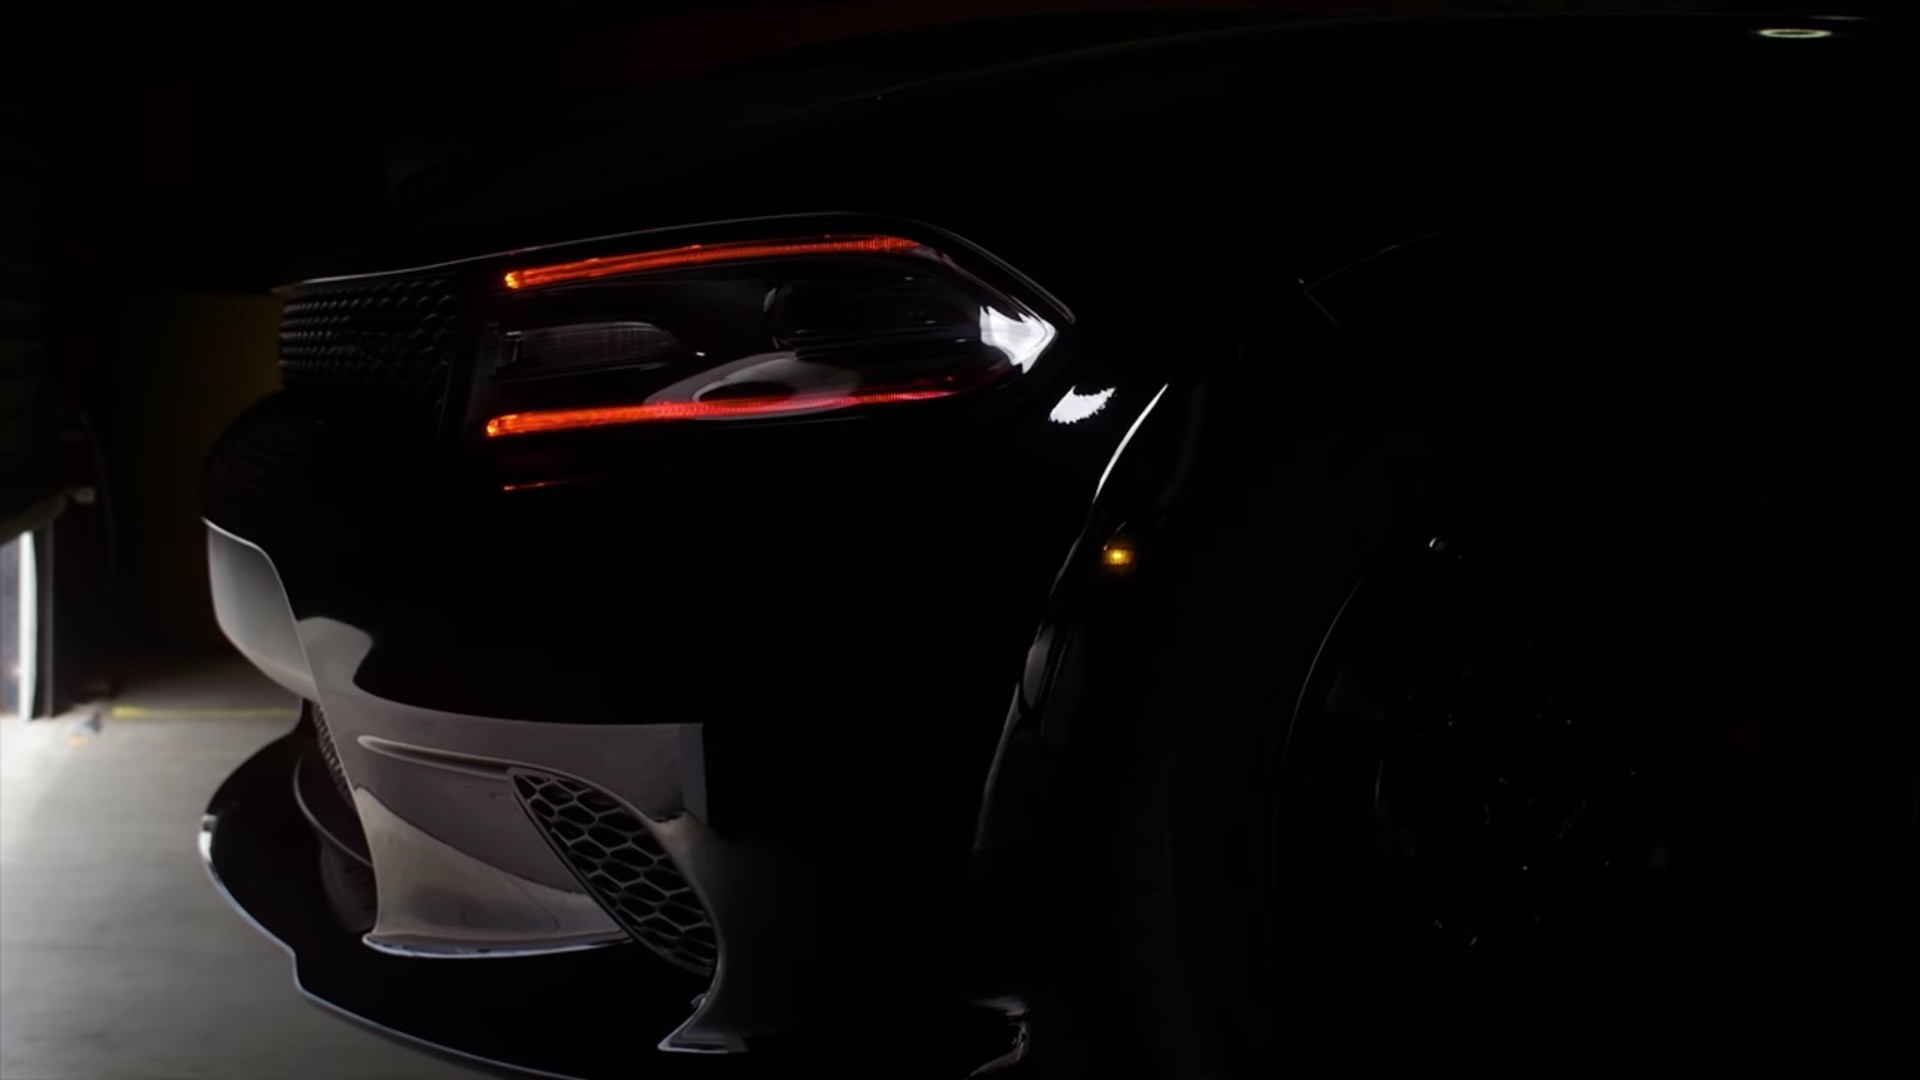 Borla Spruces Up The Charger SRT Hellcat With Loud Exhaust Systems